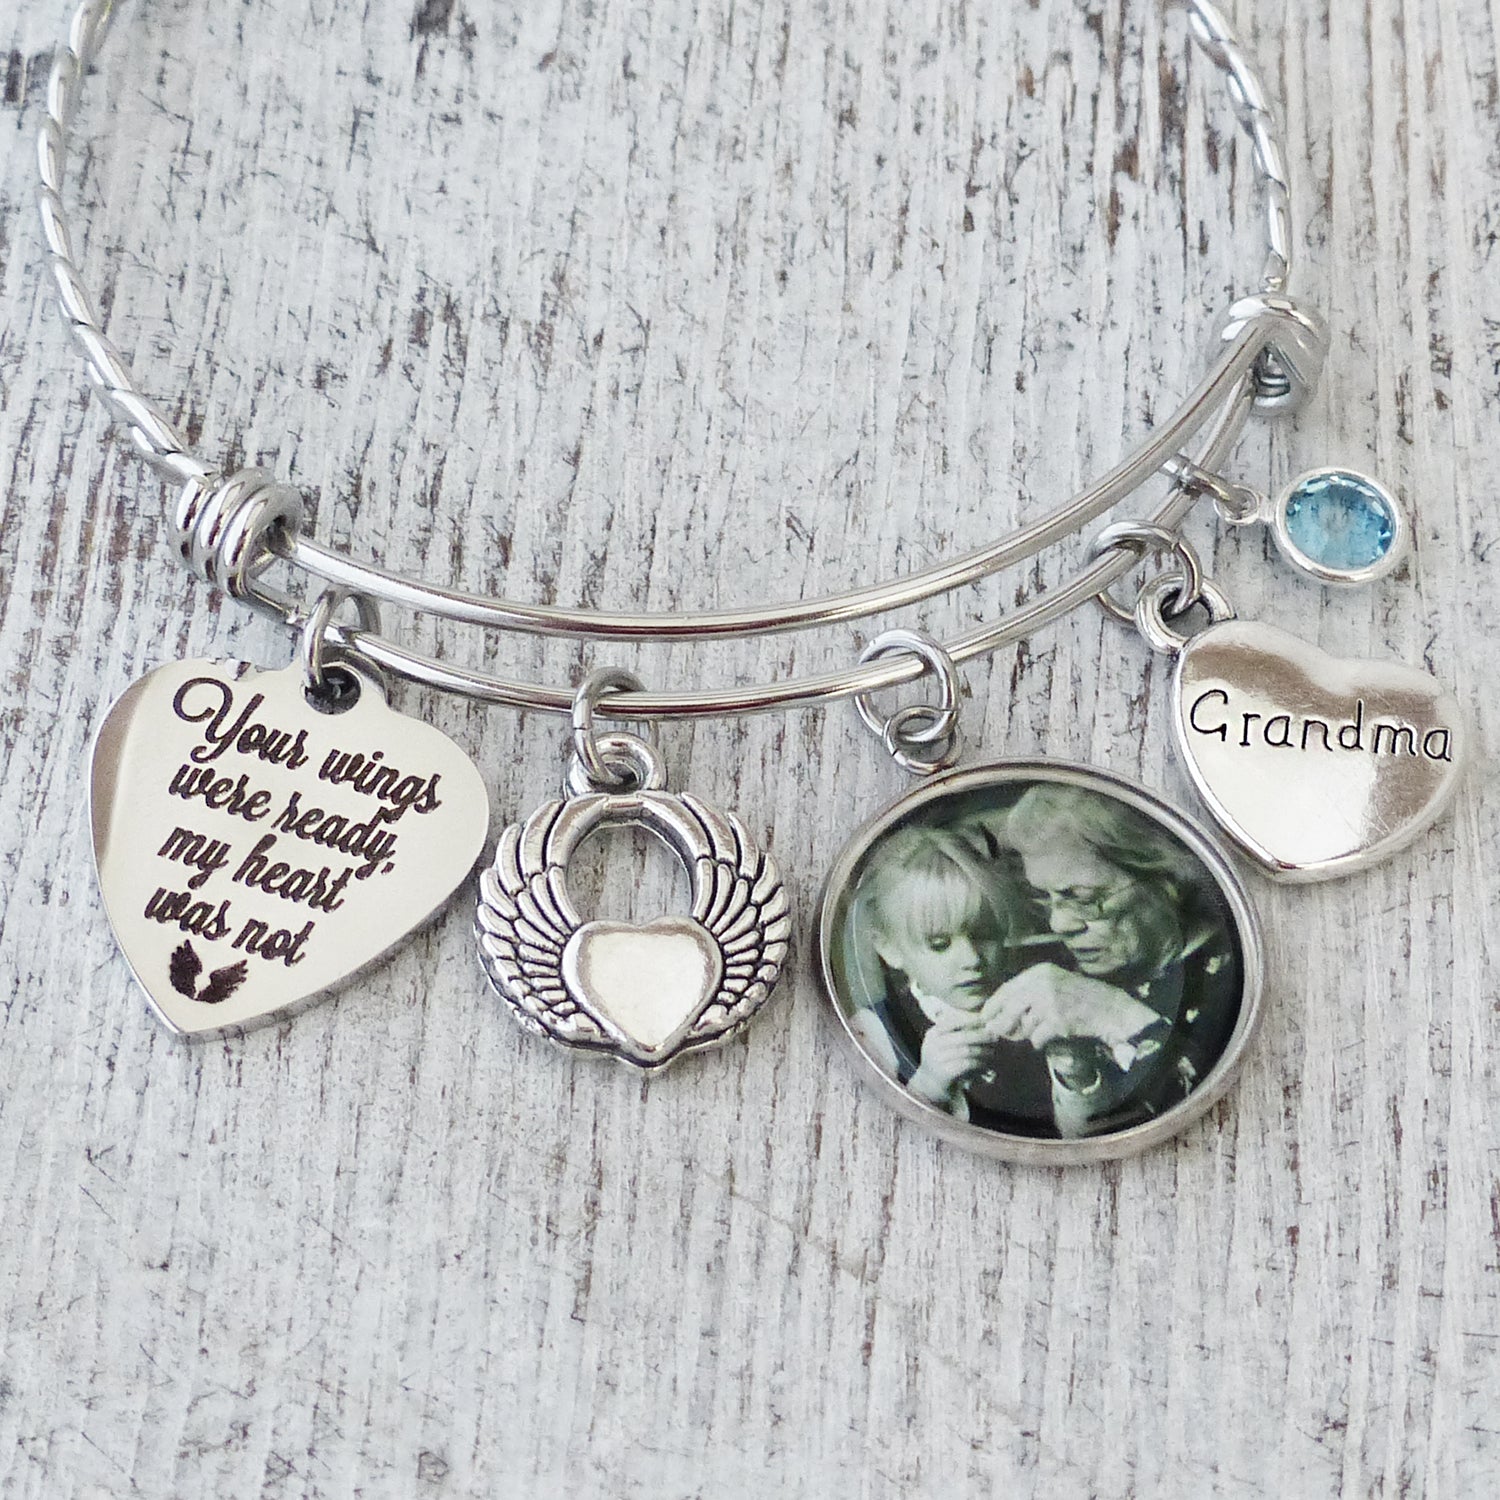 custom photo memorial bangle bracelet with saying Your wings were ready my heart was not-includes angel wing charm and grandma charm and custom birthstone